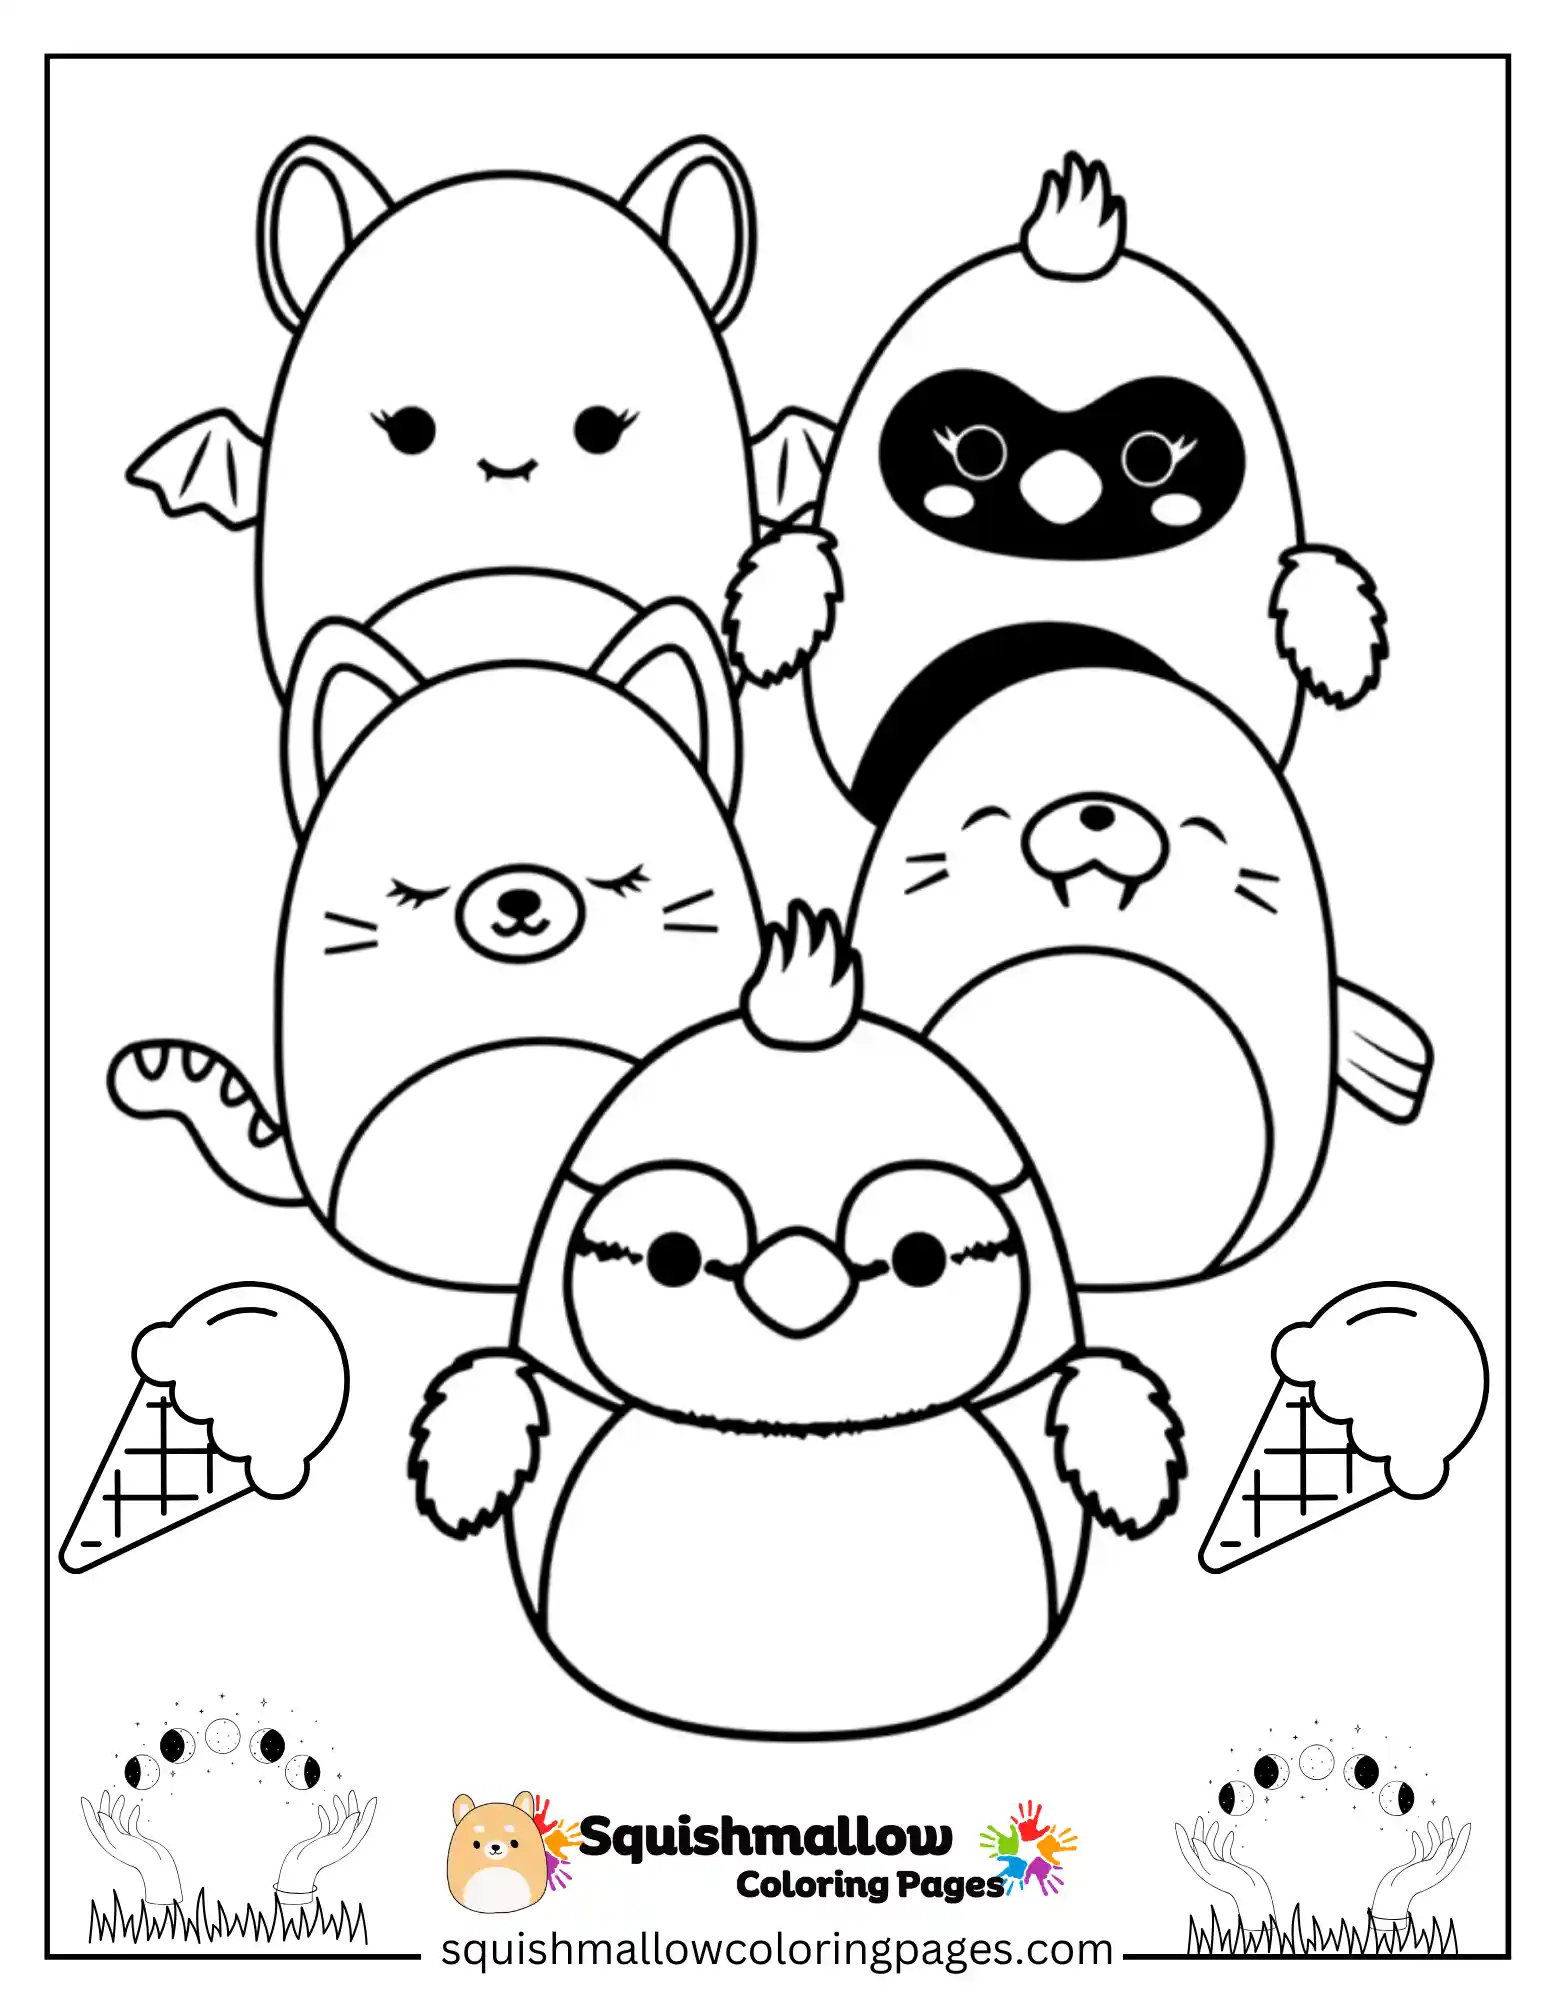 5 Cute Squishmallows Coloring Pages